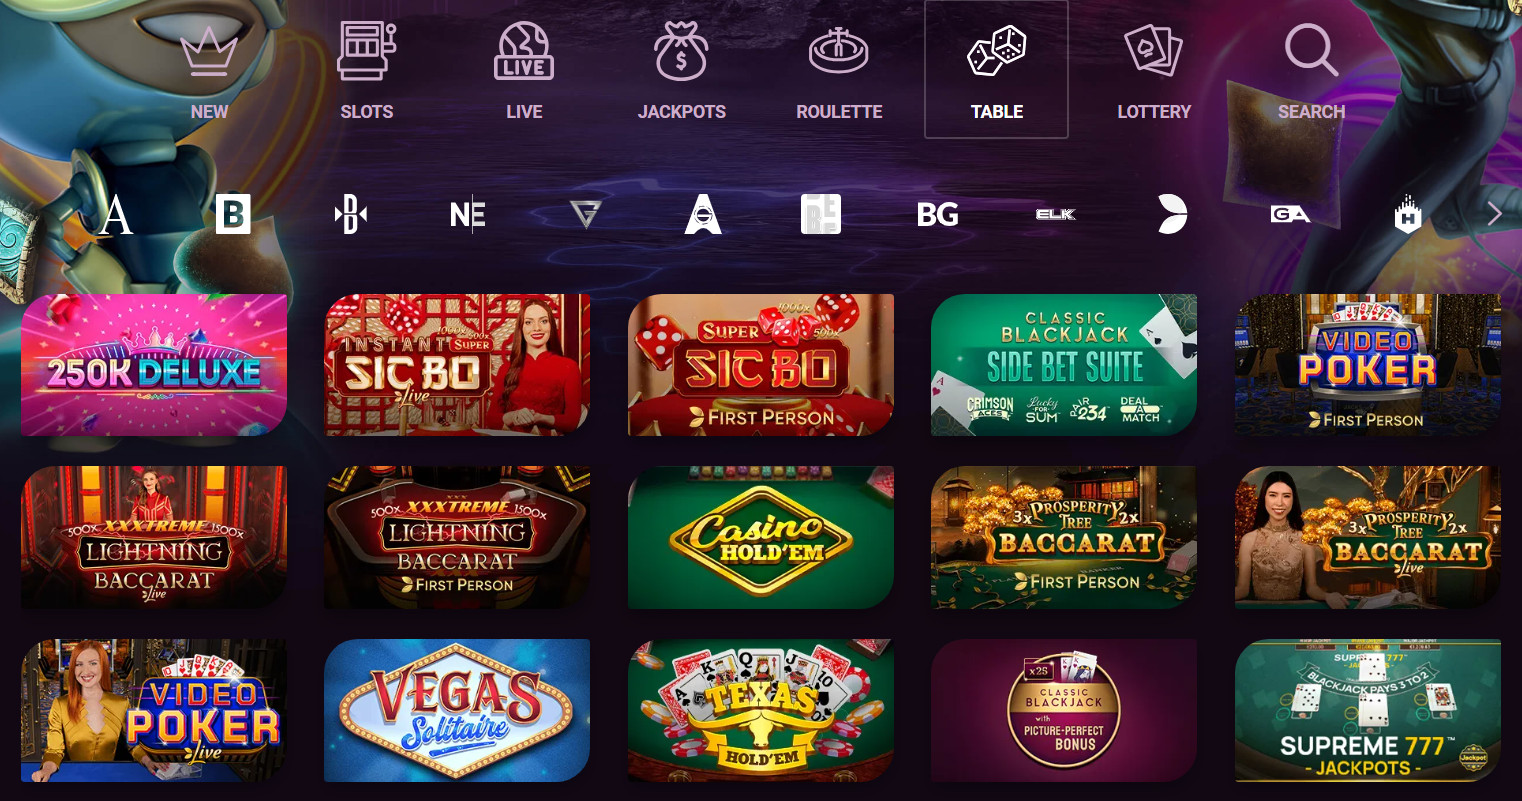 Table Section at Ricky Casino Screenshot